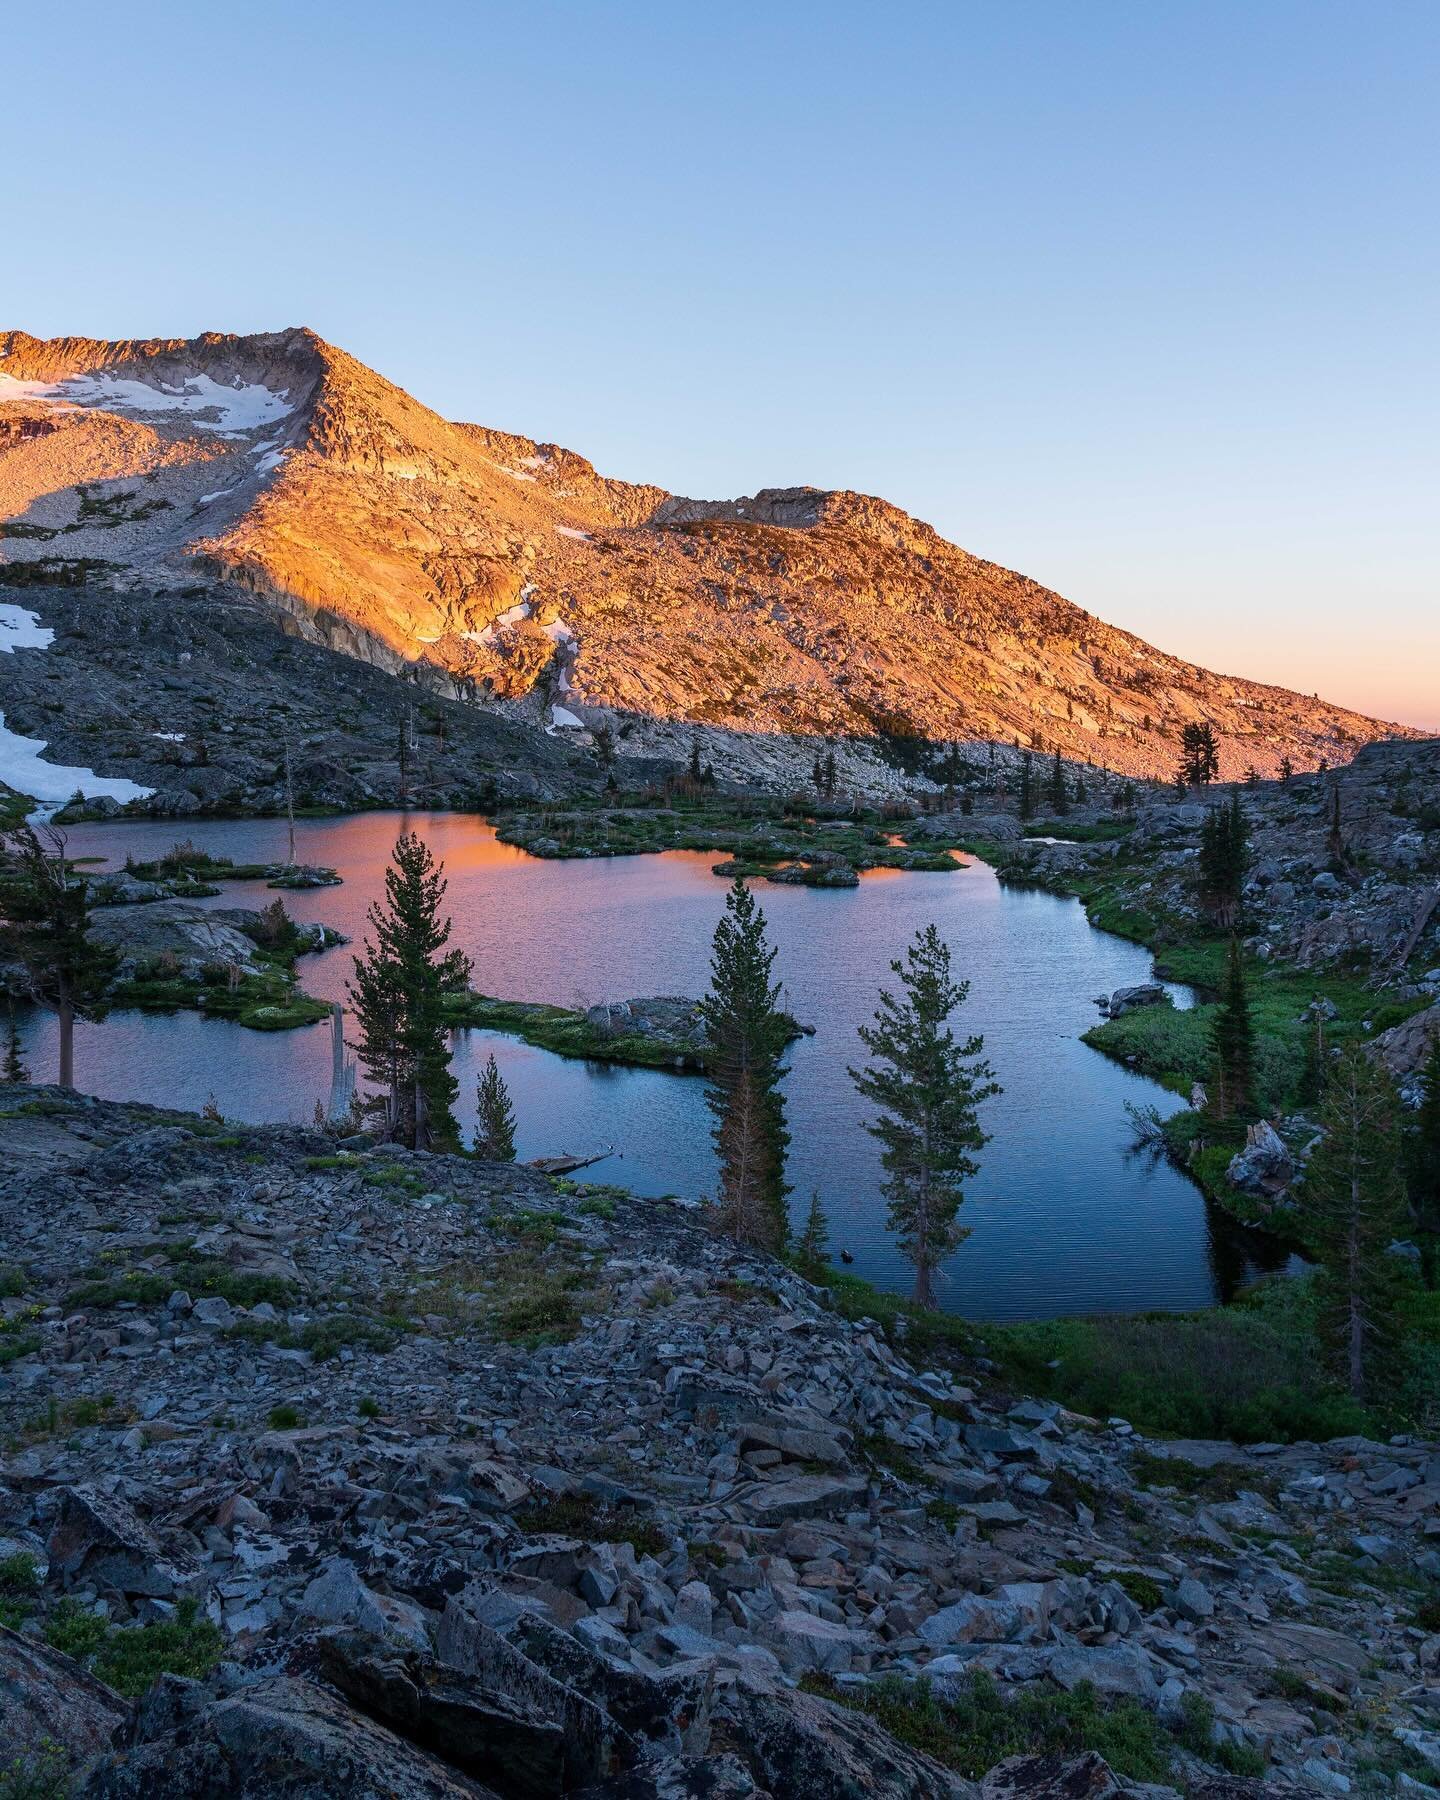 What&rsquo;s one of the best non-national park wilderness areas in Northern California? 🤔⬇️

Desolation Wilderness near South Lake Tahoe!

Desolation is&hellip; not very desolate. It&rsquo;s an incredibly popular backpacking area with a strict daily